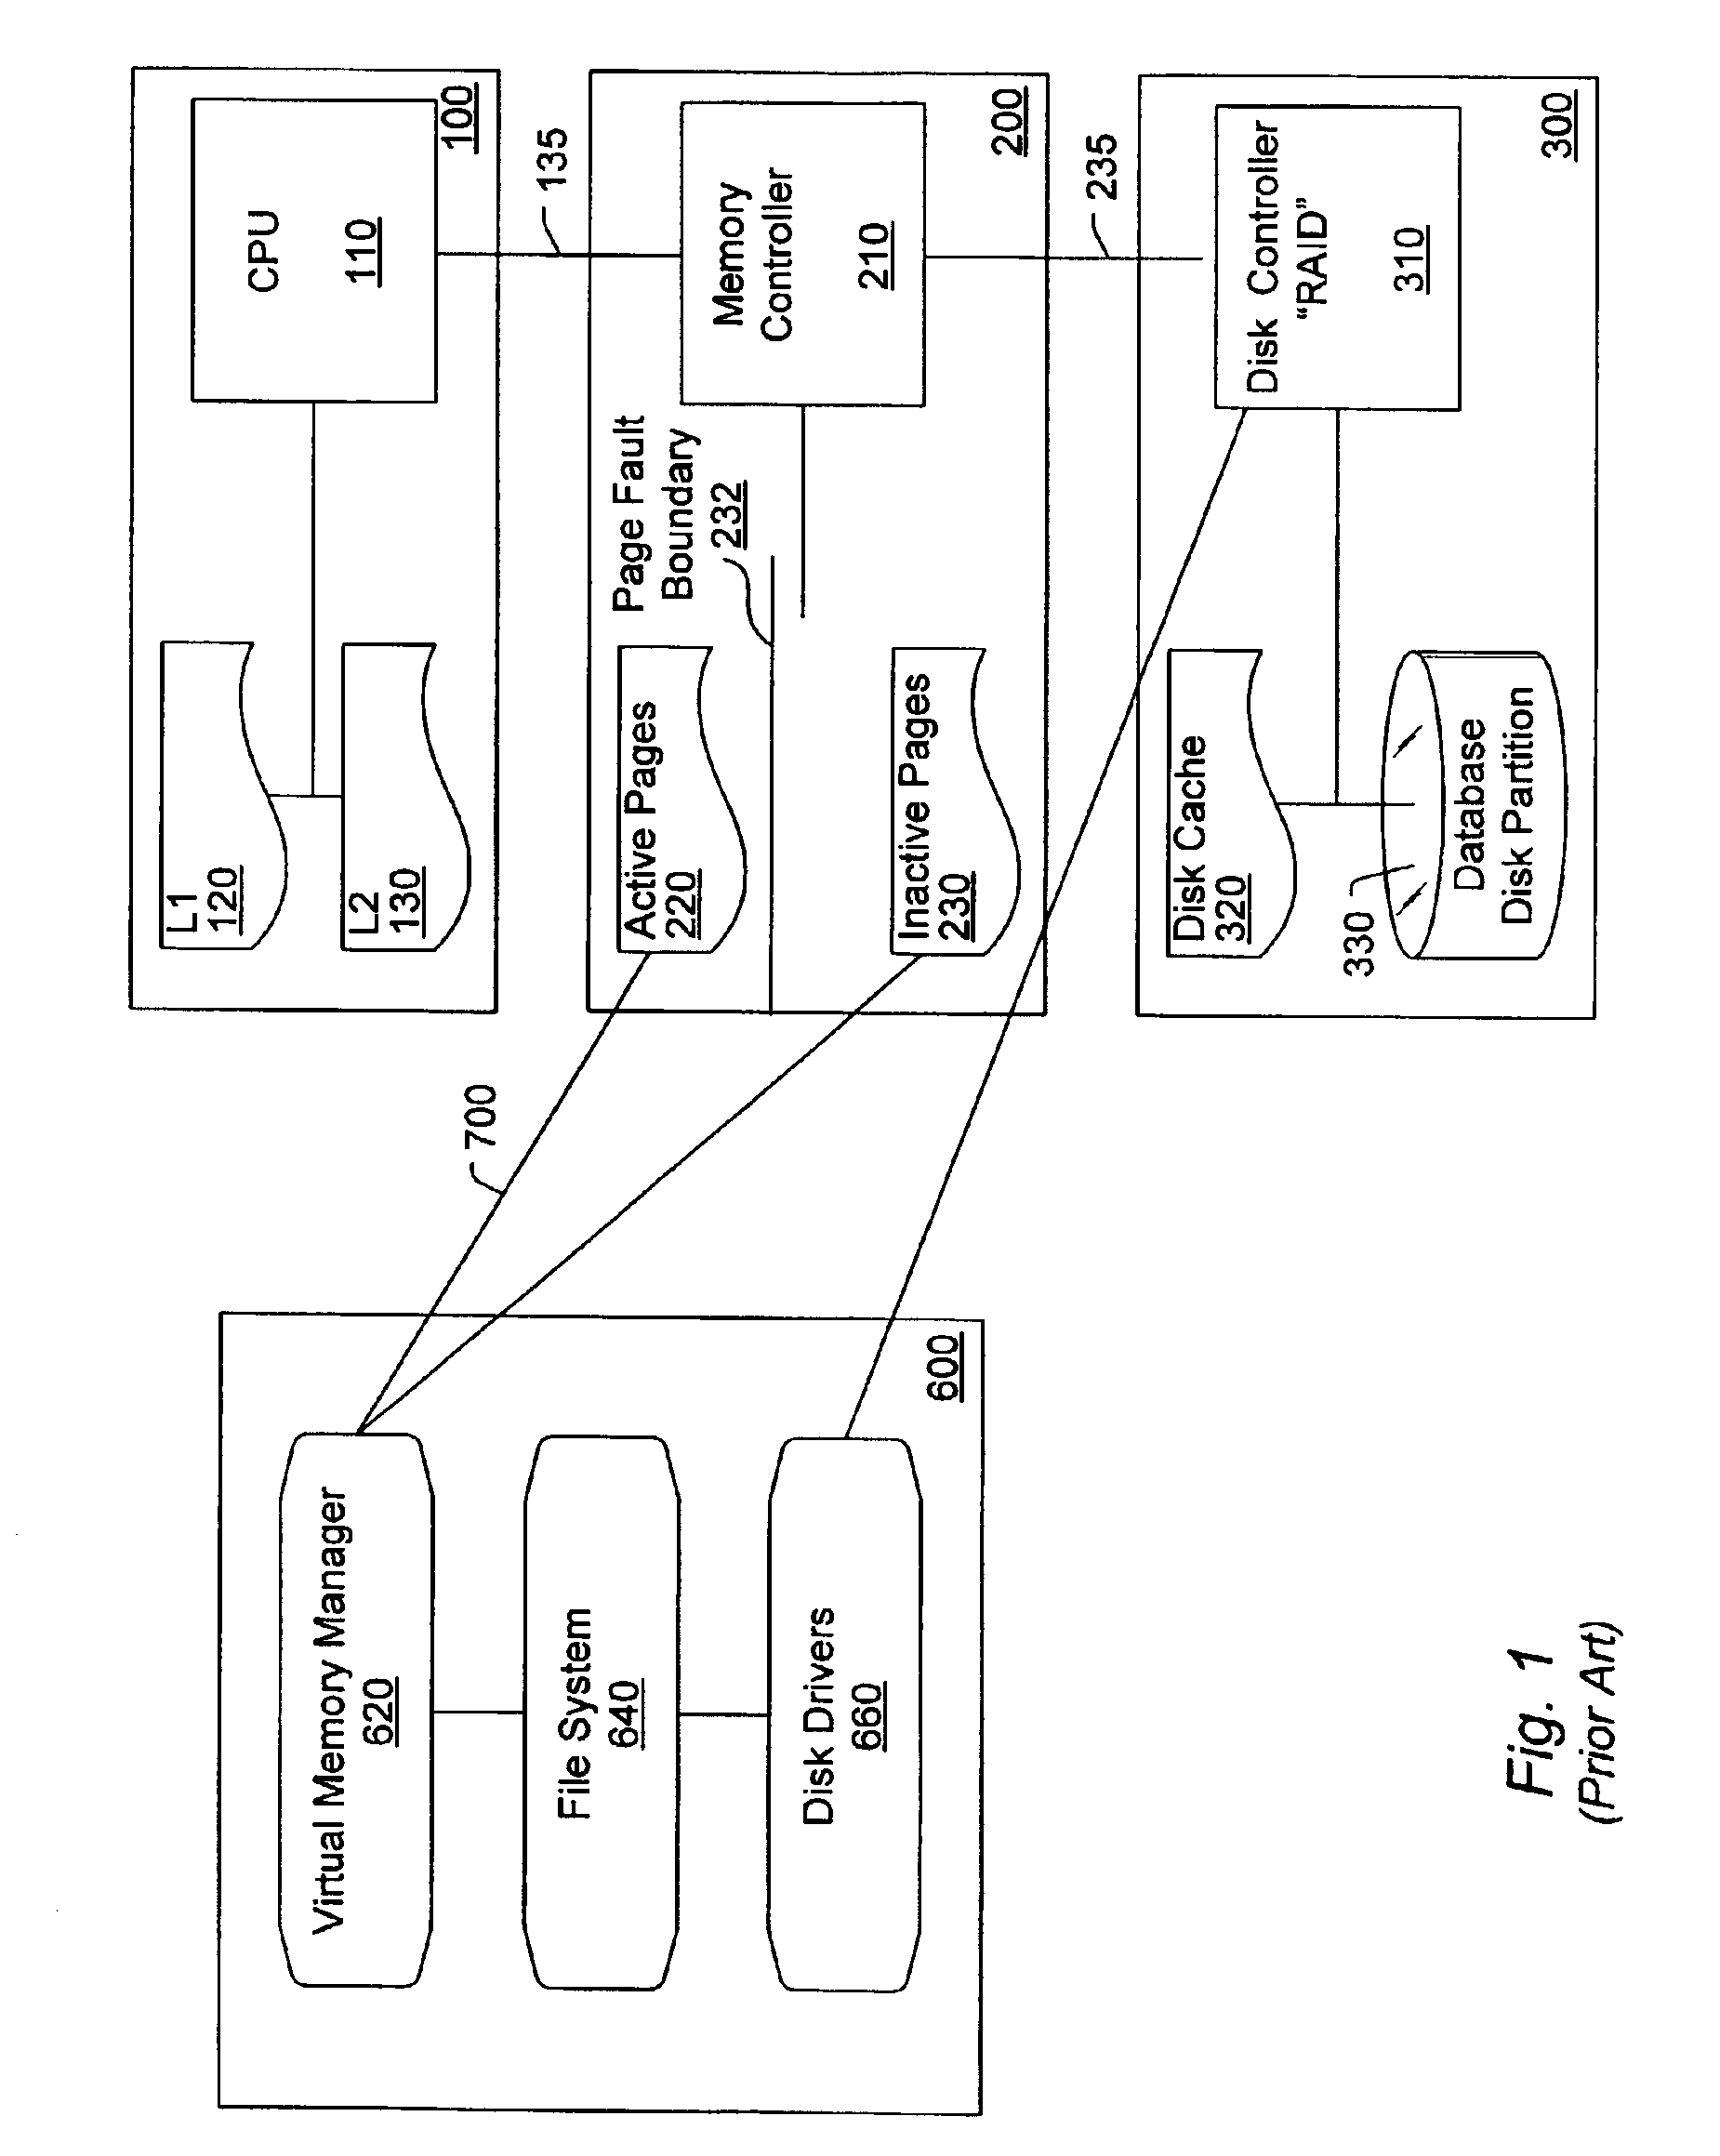 Managing a codec engine for memory compression/decompression operations using a data movement engine